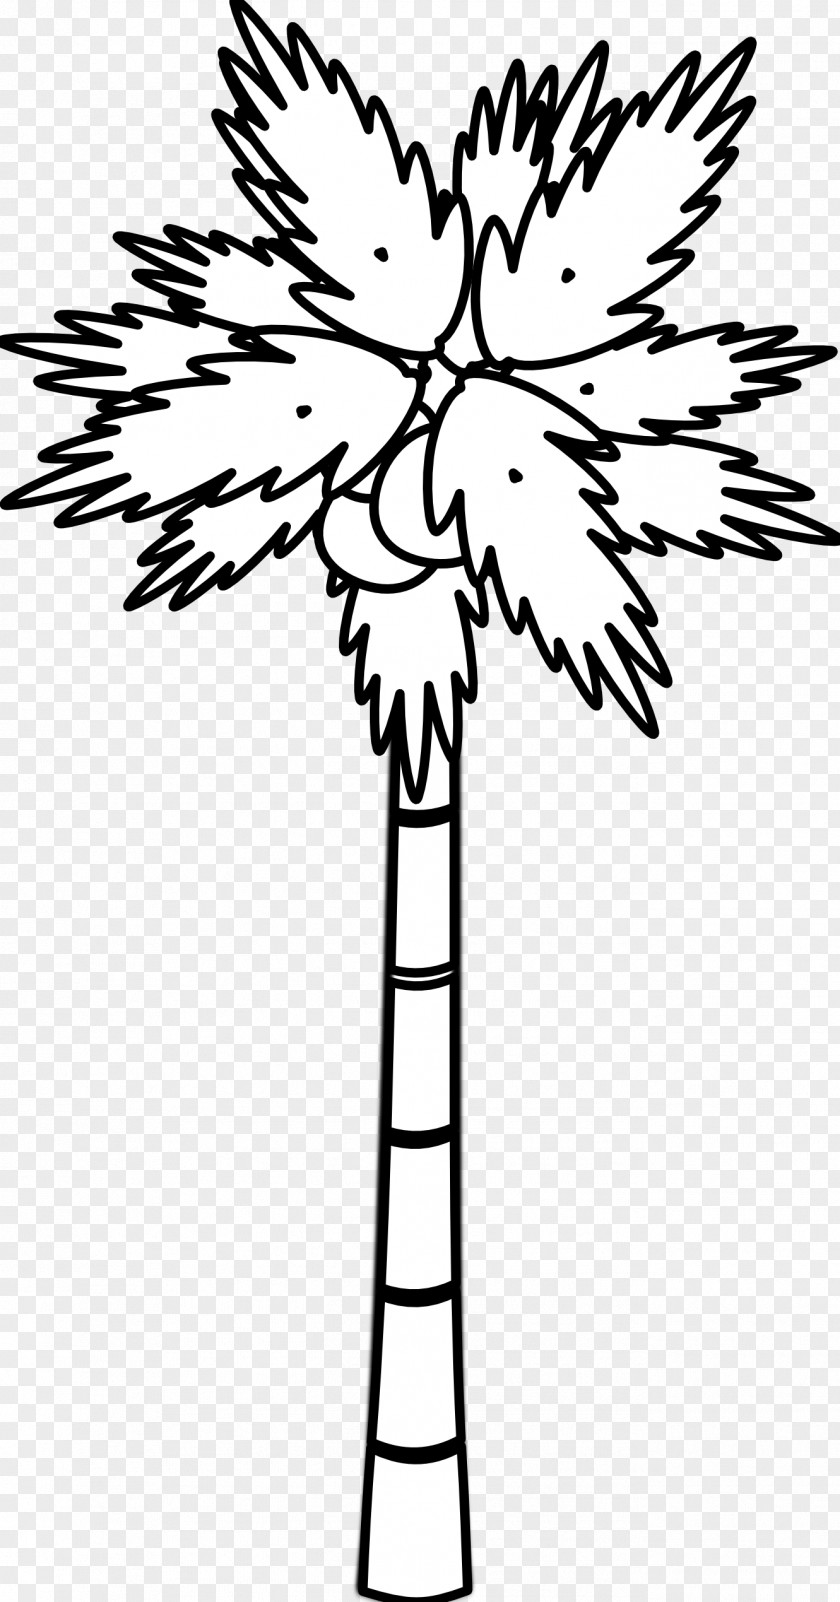 Black And White Tree Tattoos Coconut Arecaceae Clip Art PNG